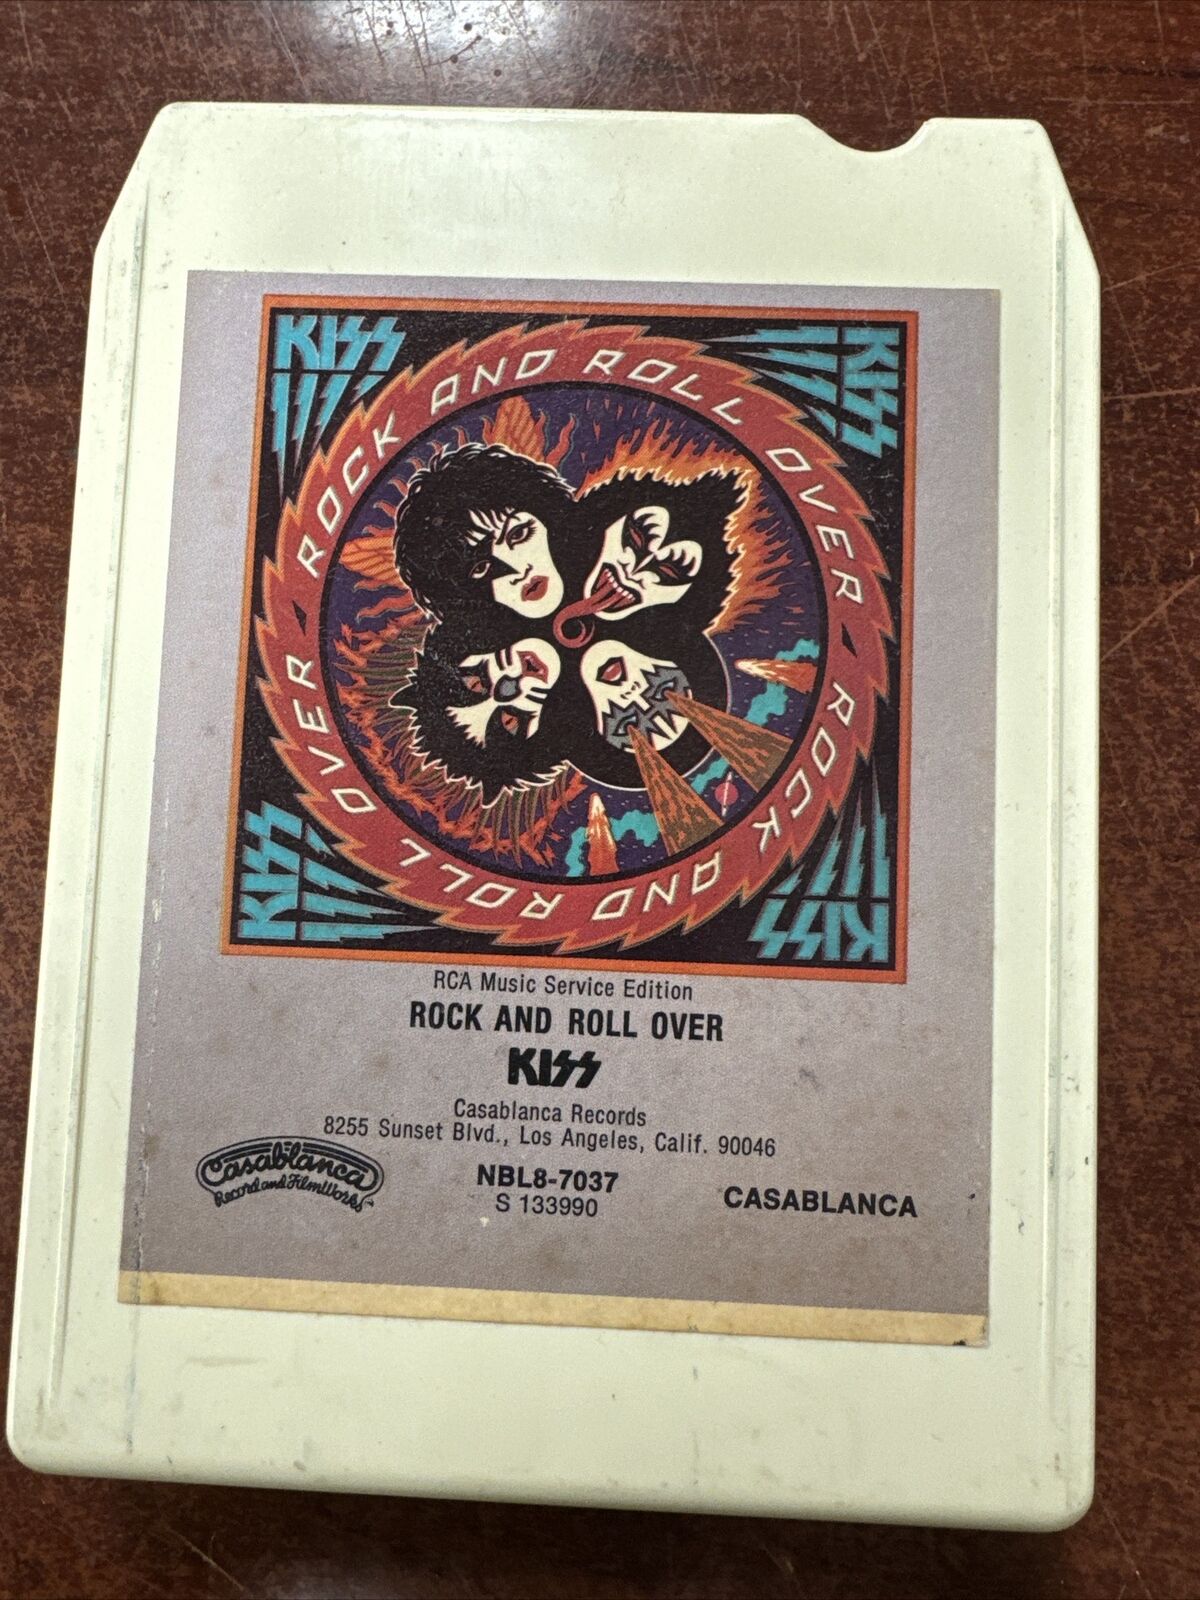 KISS ROCK AND ROLL OVER 8 Track Played Through 